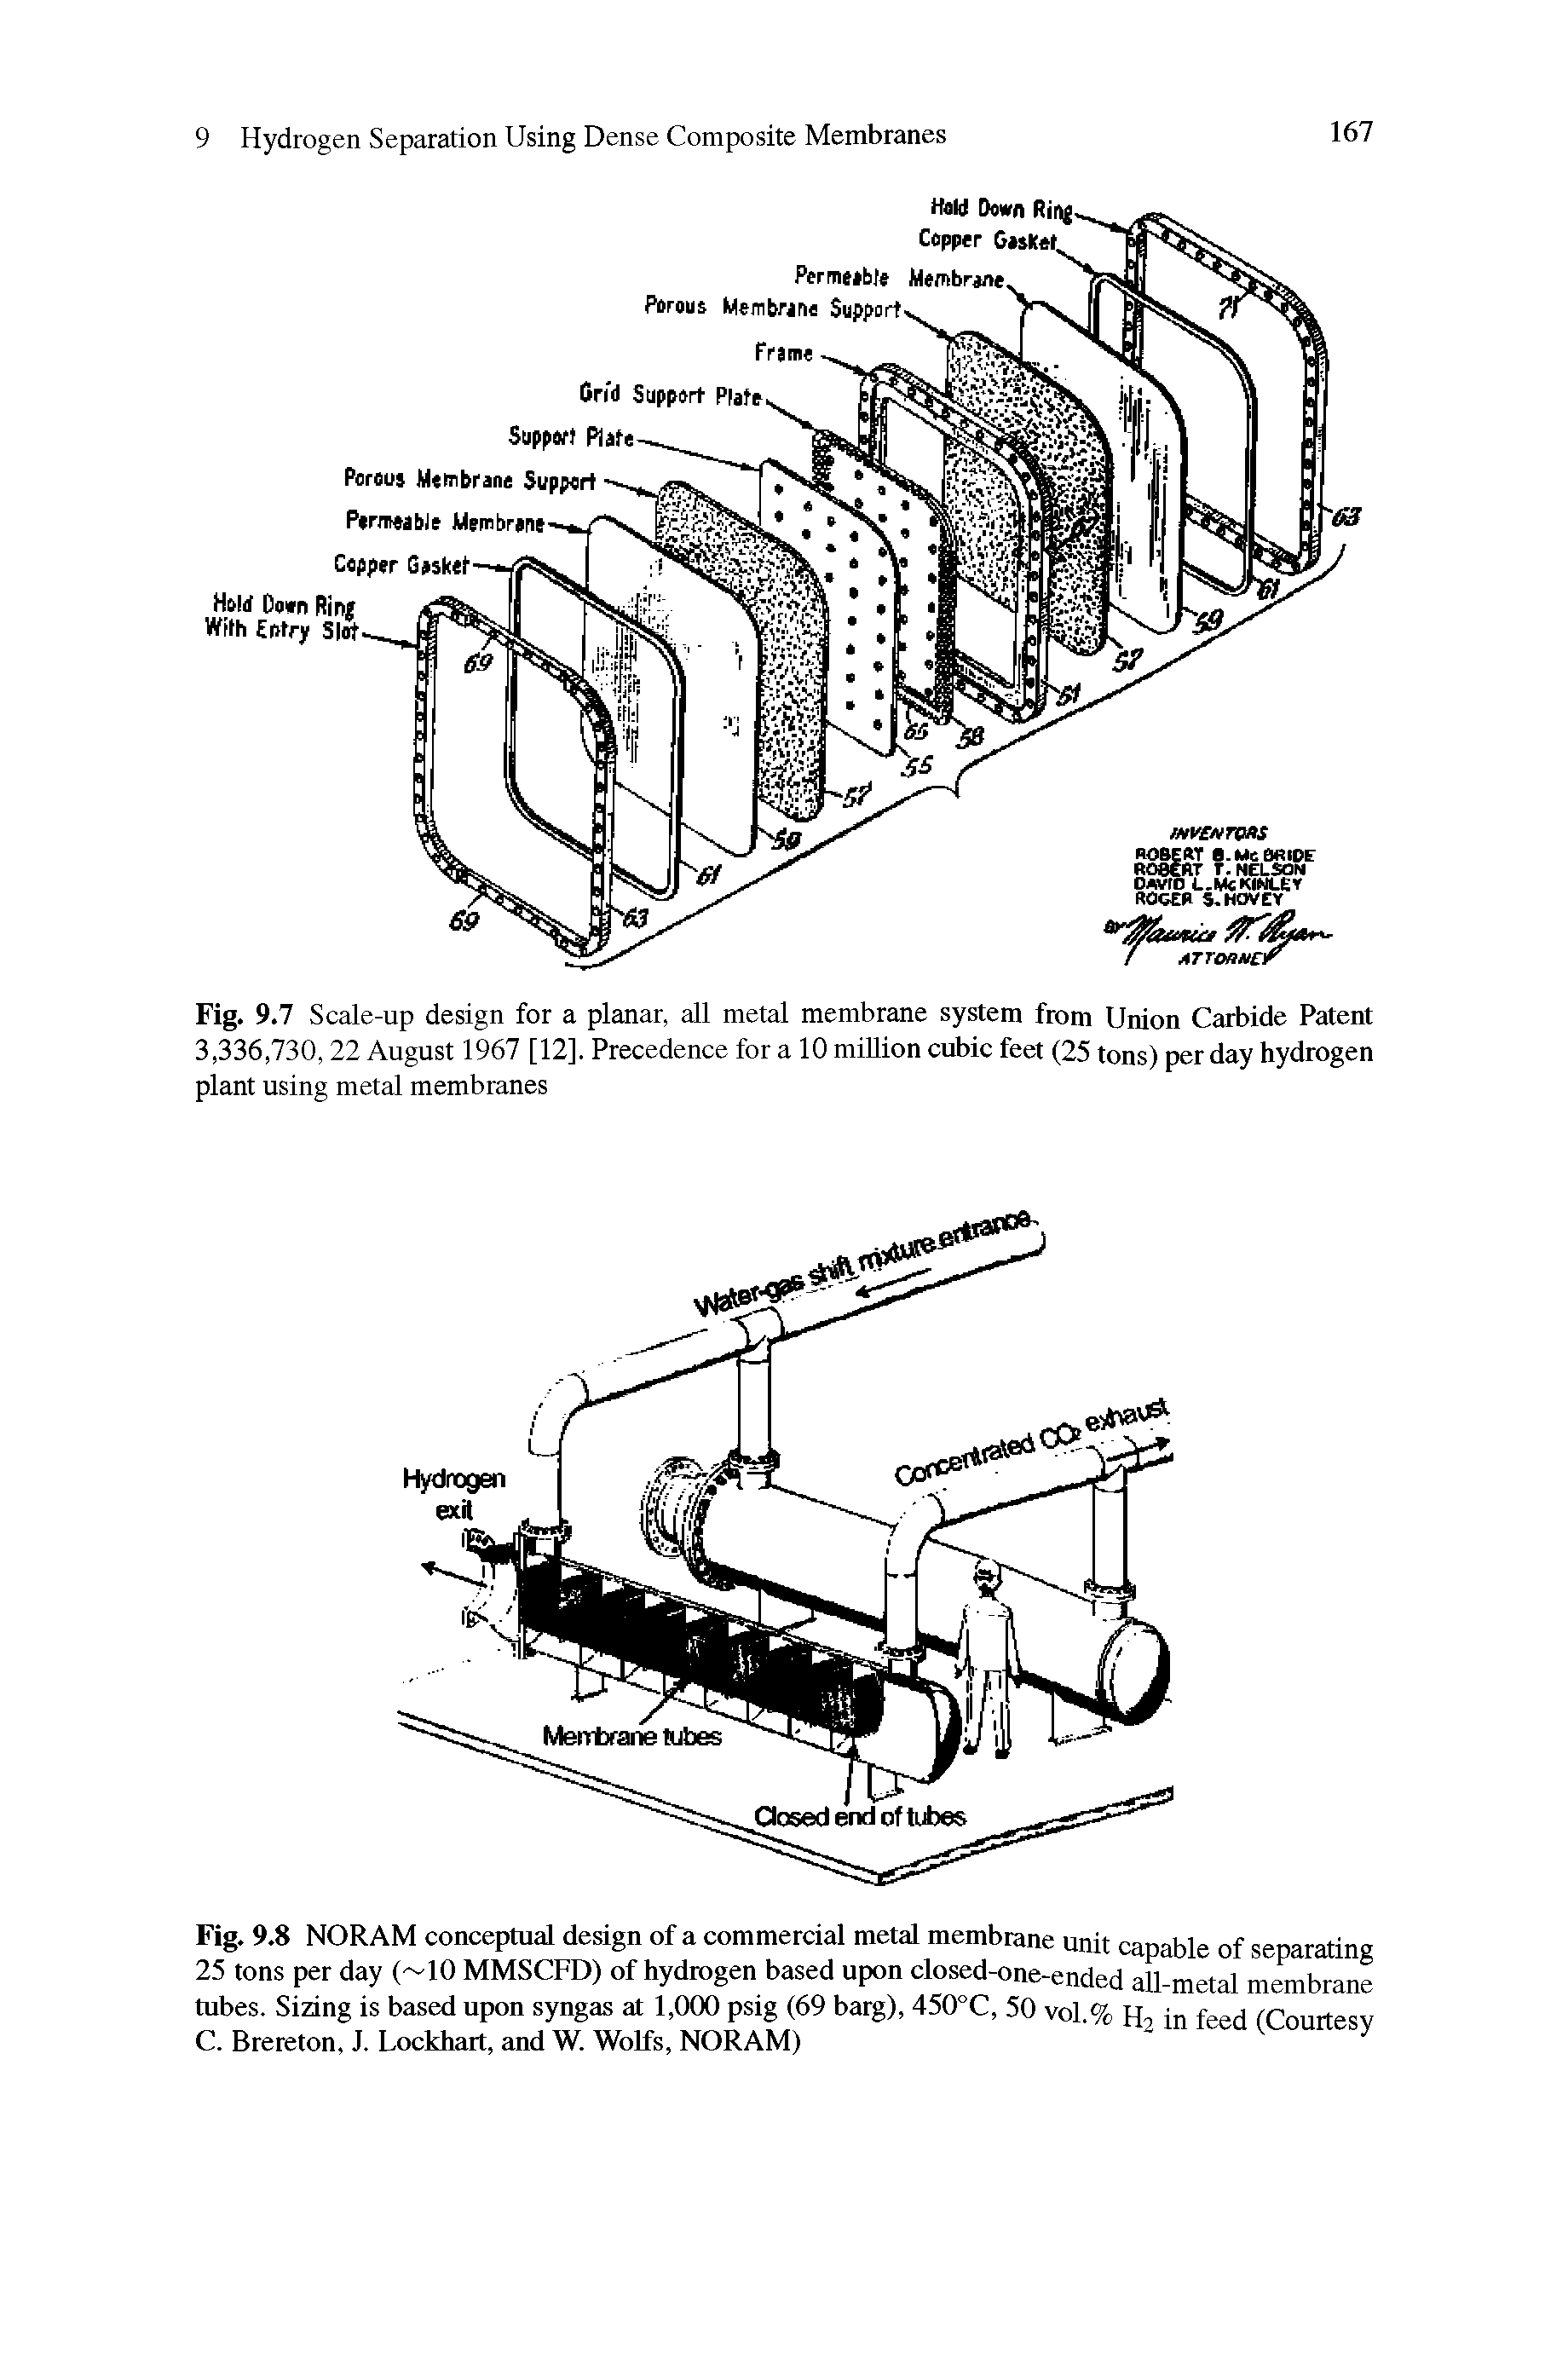 Fig. 9.7 Scale-up design for a planar, all metal membrane system from Union Carbide Patent 3,336,730,22 August 1967 [12], Precedence for a 10 miUion cubic feet (25 tons) per day hydrogen plant using metal membranes ...